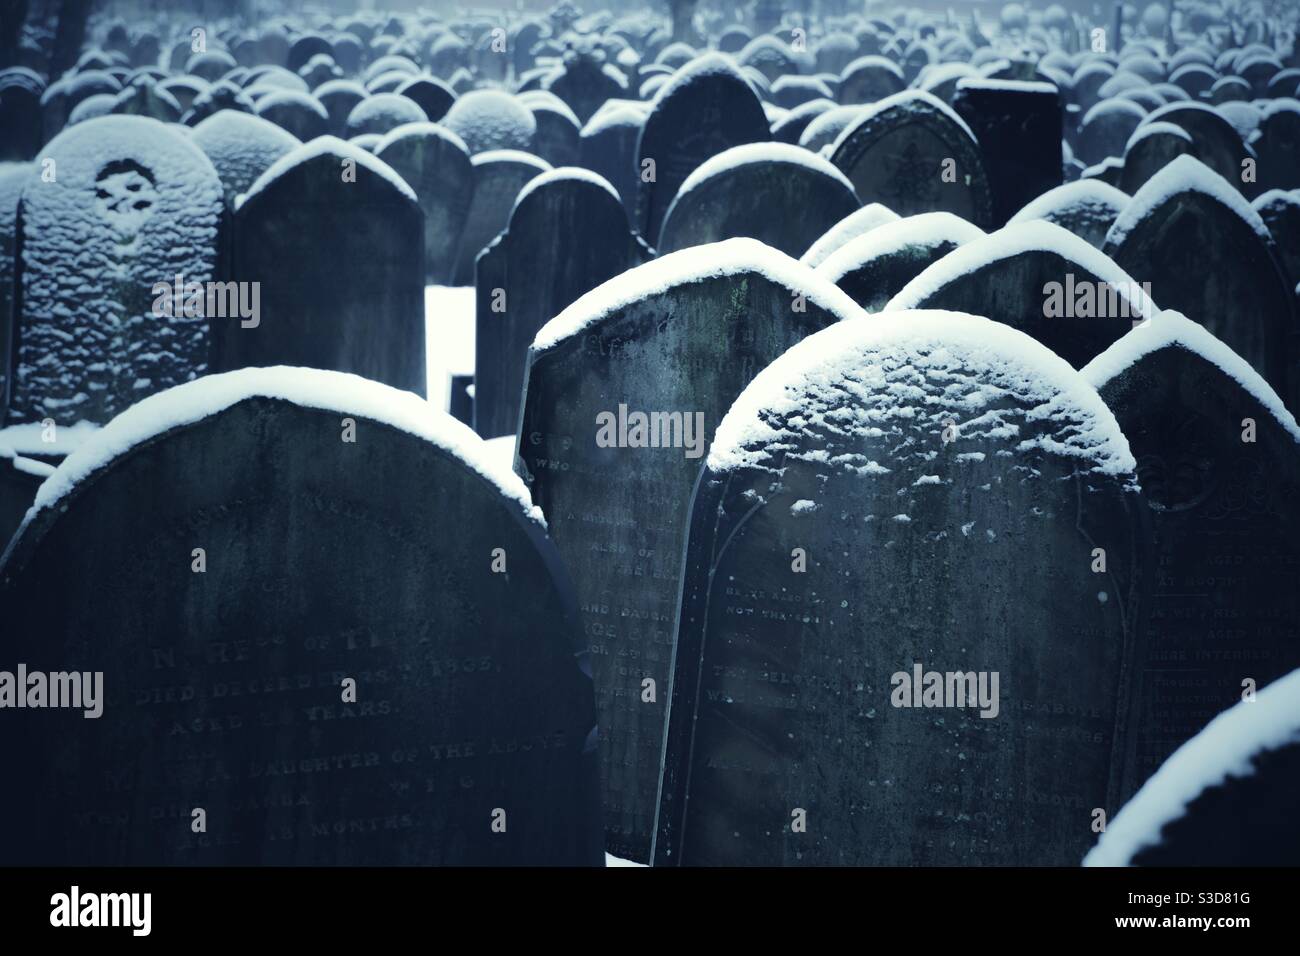 Full frame religious background of gravestones in a cemetery covered in cold snow in a Winter scene Stock Photo